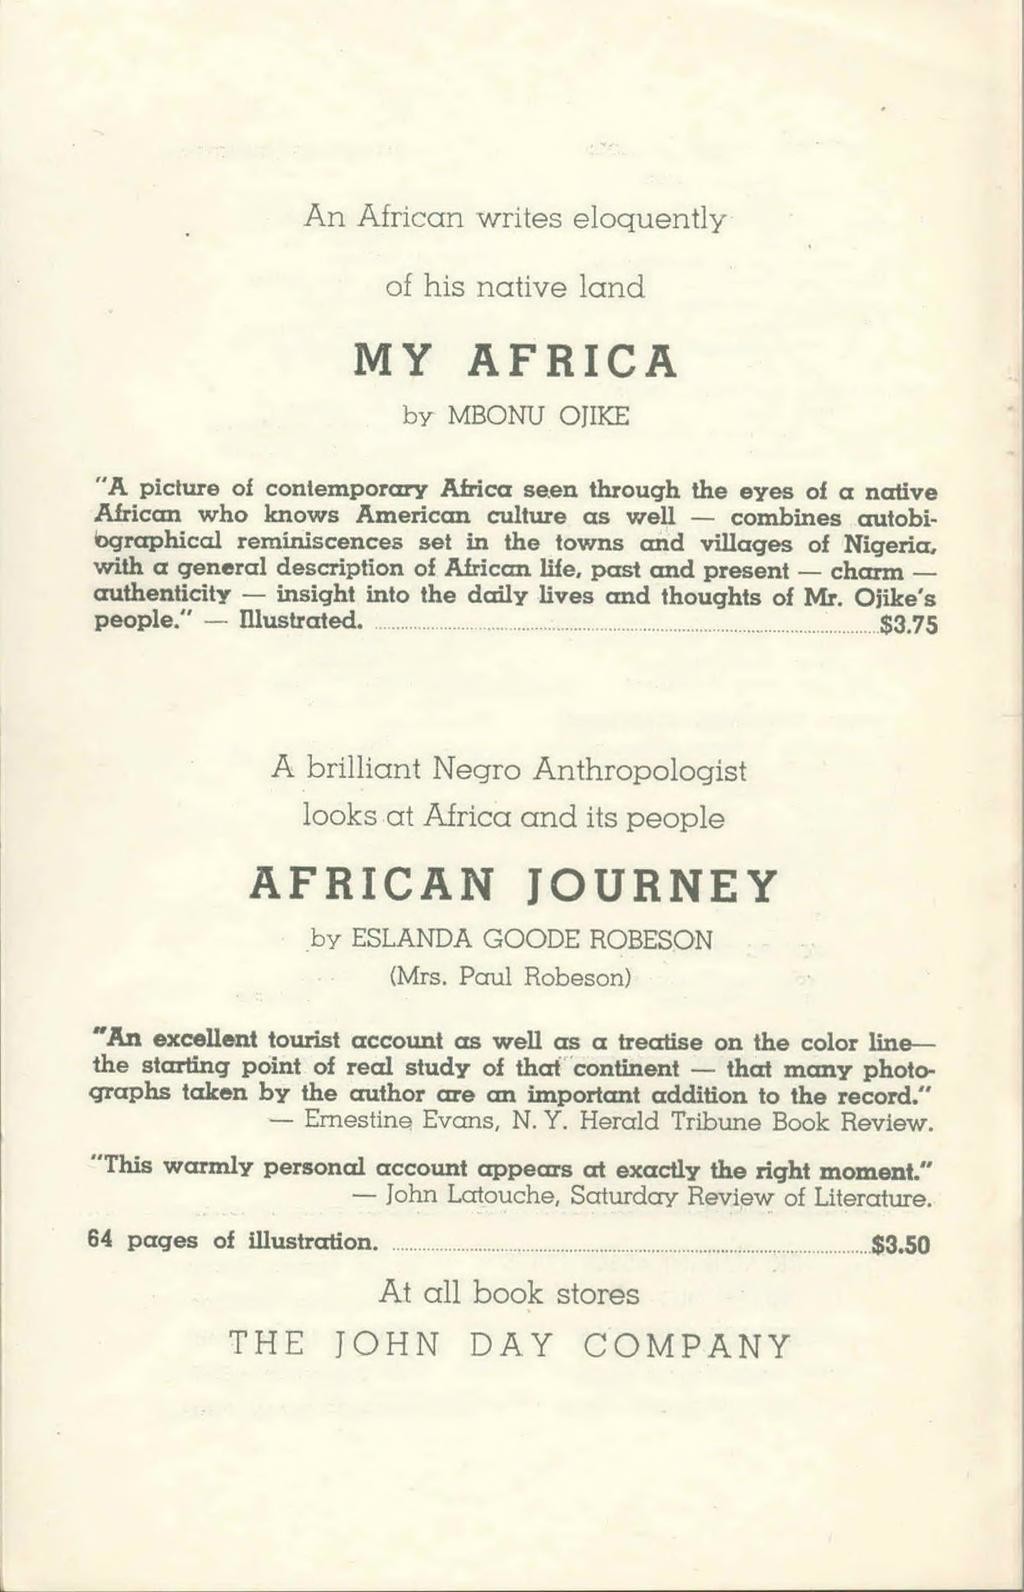 An African writes eloquently of his native land MY AFRICA by MBONU OJIKE "A picture of contemporary Africa seen through the eyes of a native African who knows American culture as well combines